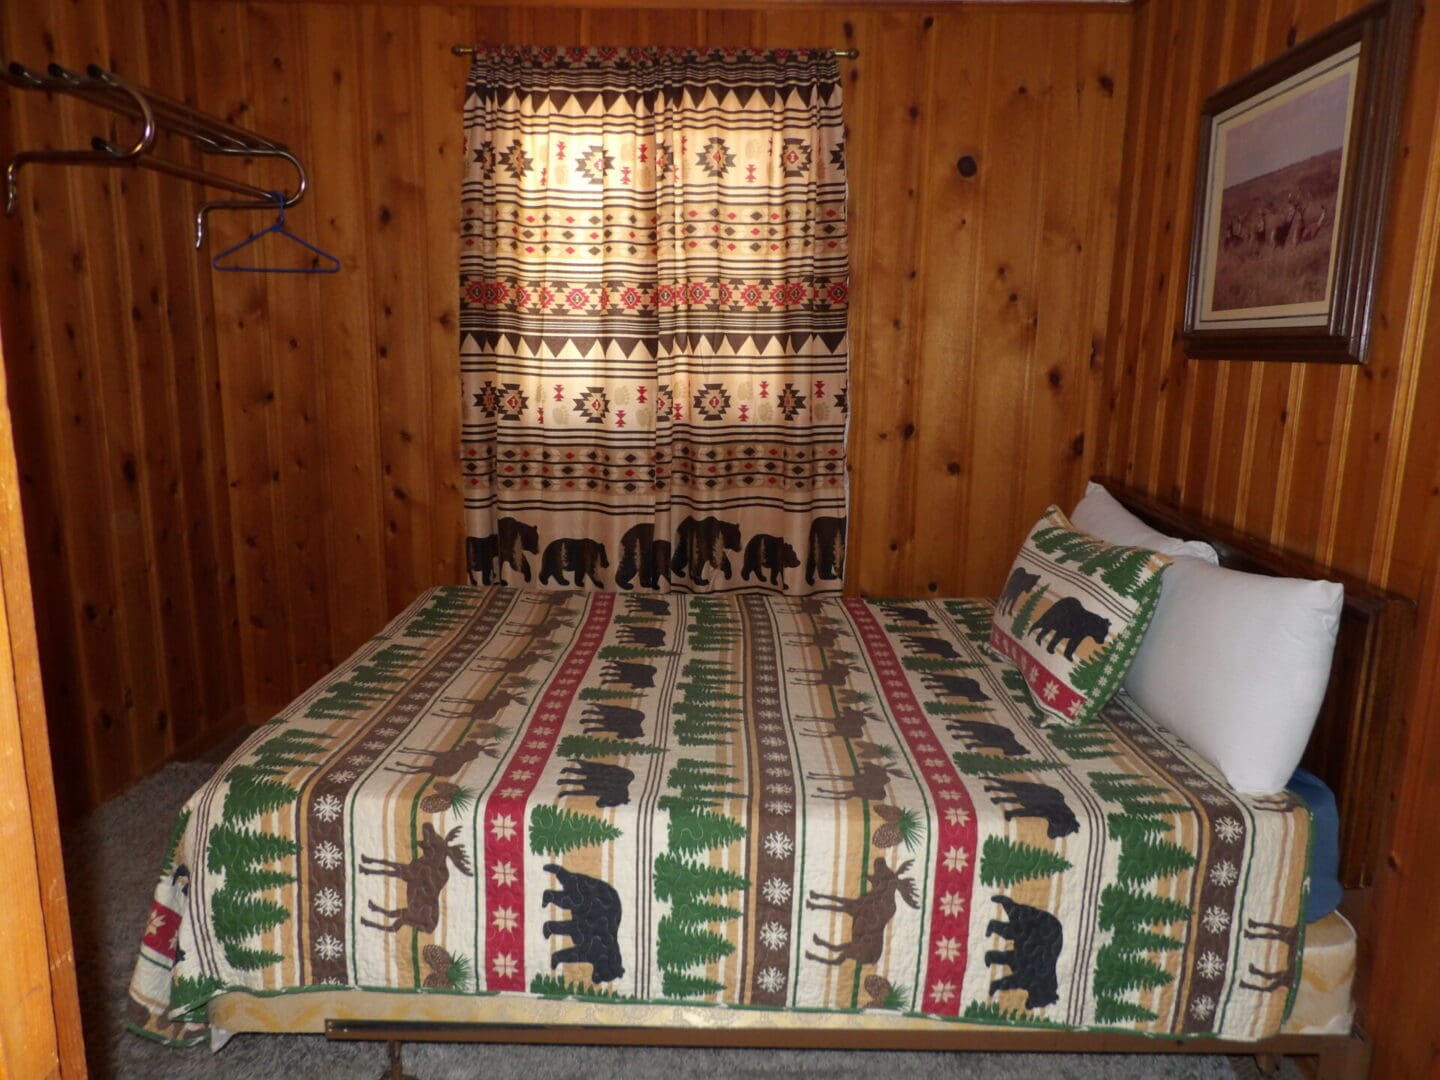 A bed with a bear and moose print on it.